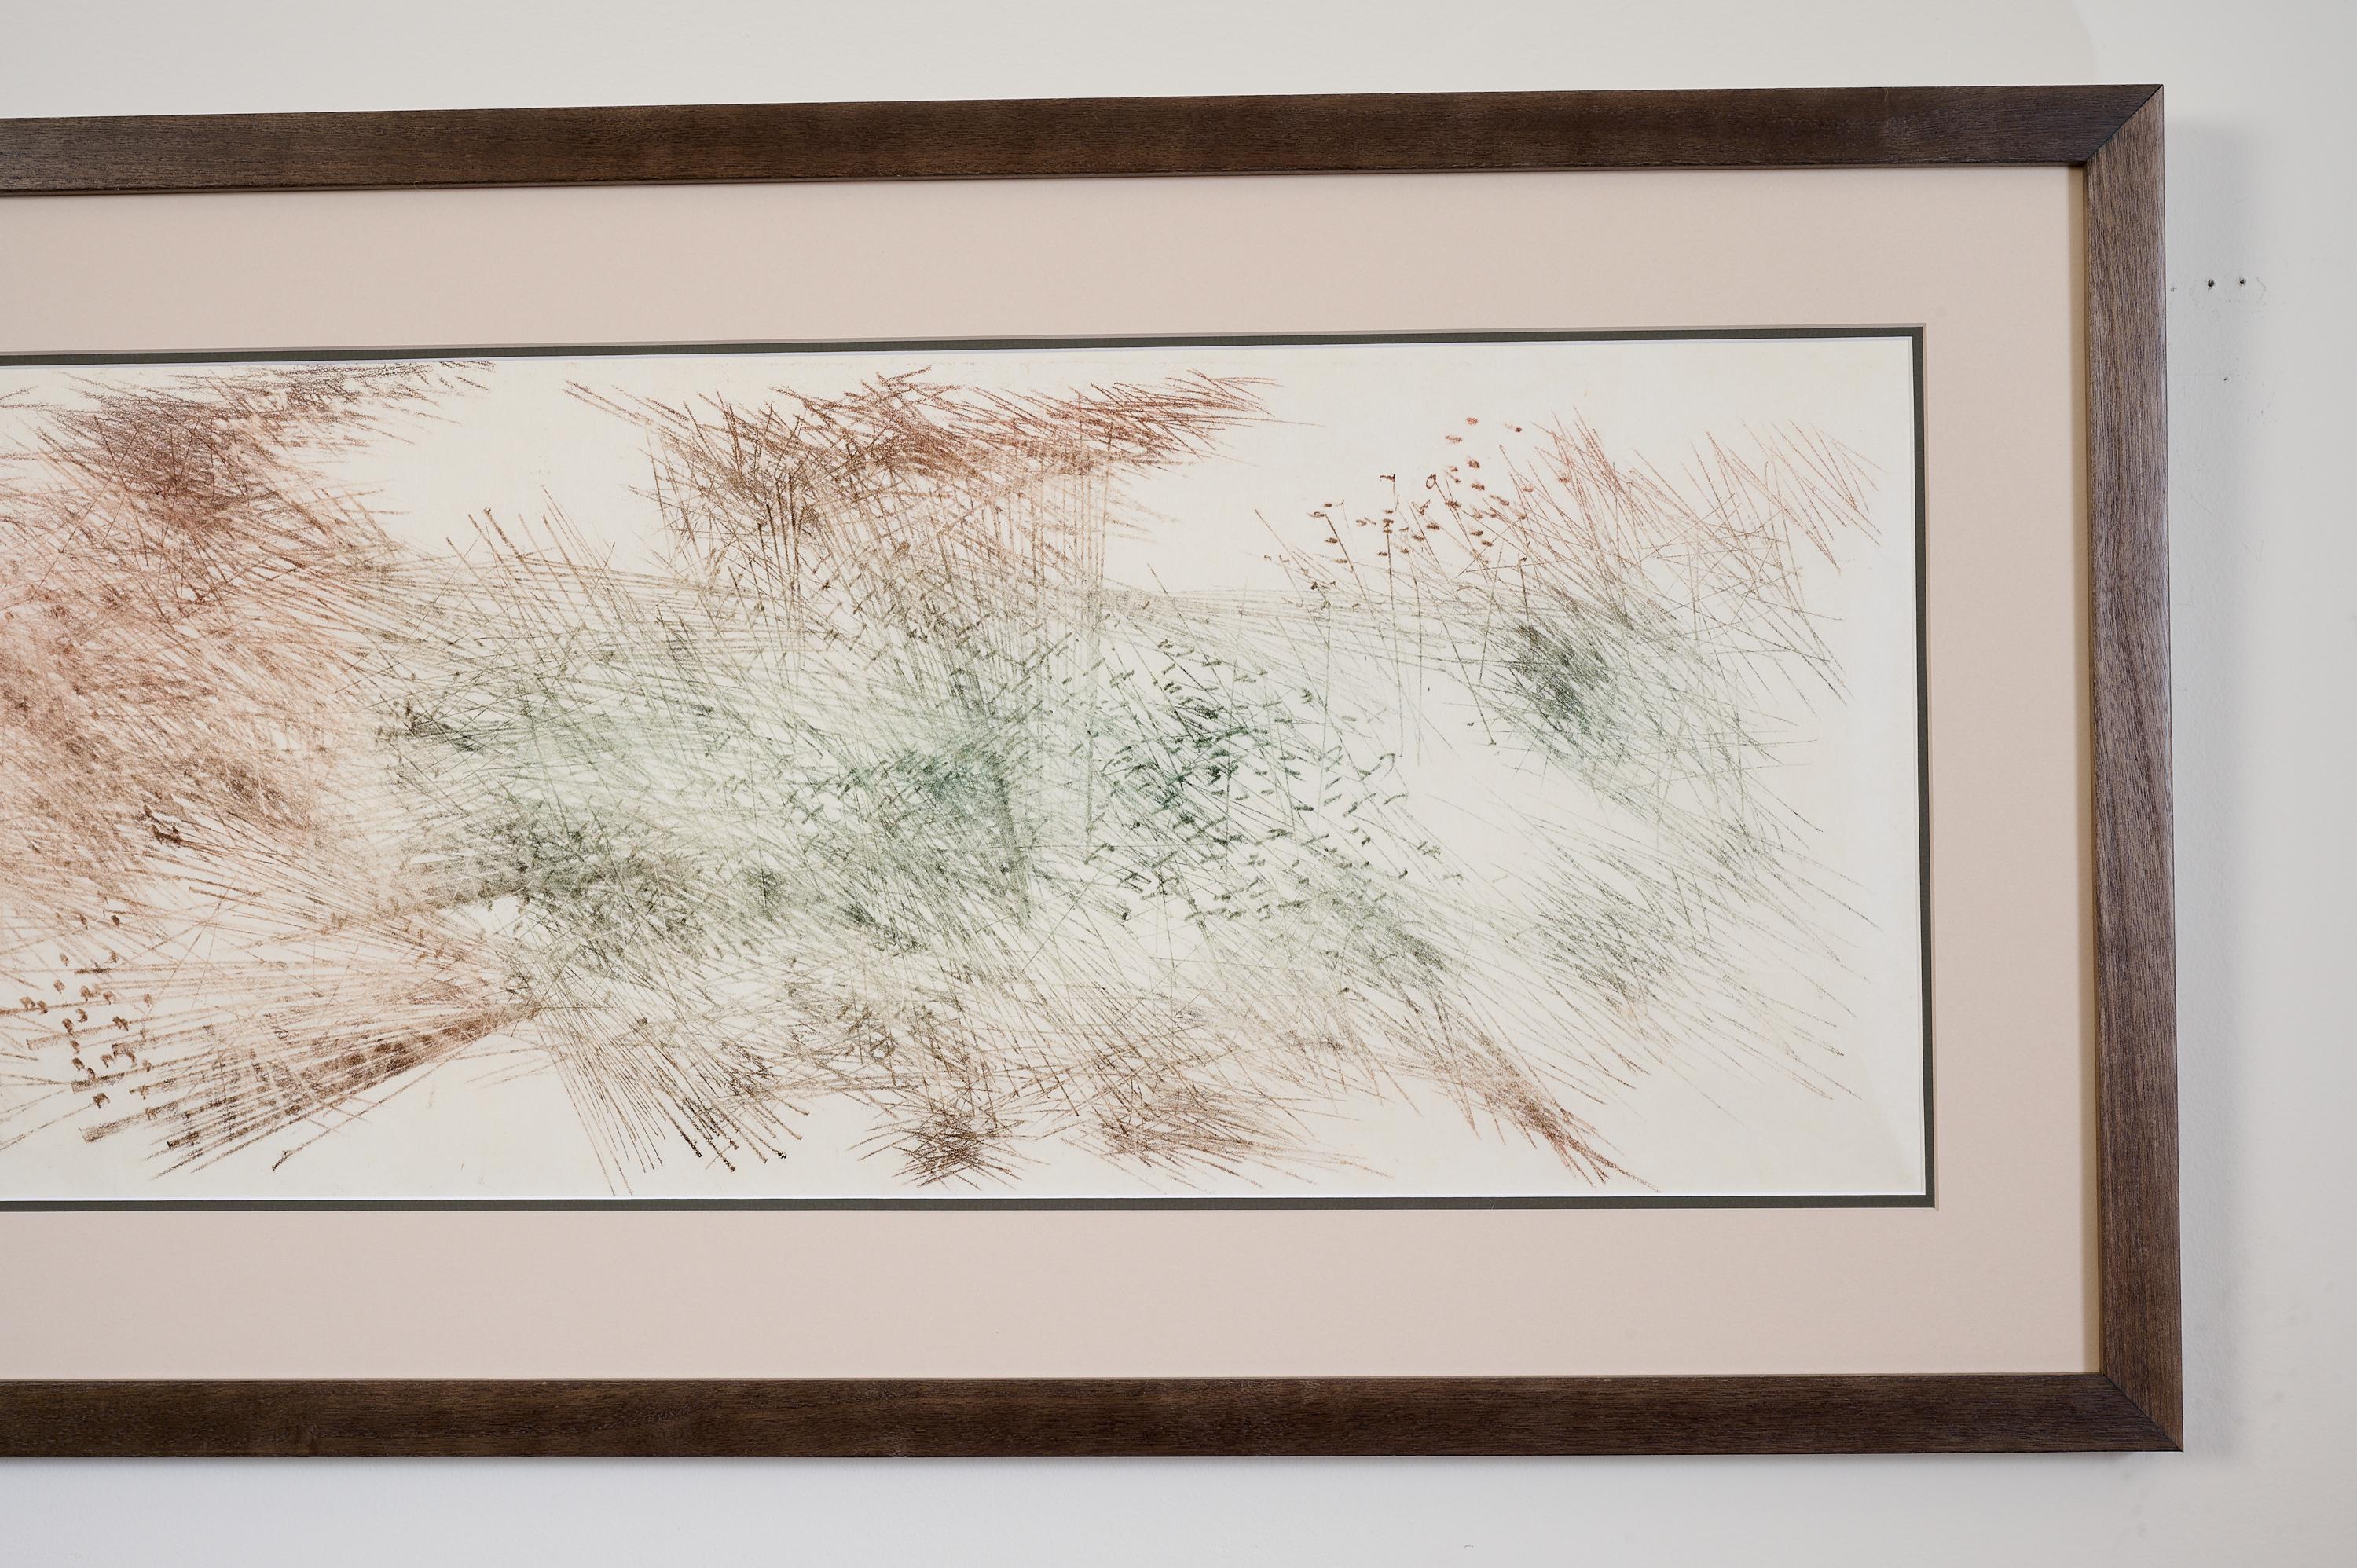 Mid-Century Modern Harry Bertoia: Untitled, Framed Monotype on Rice Paper, United States 1960s For Sale